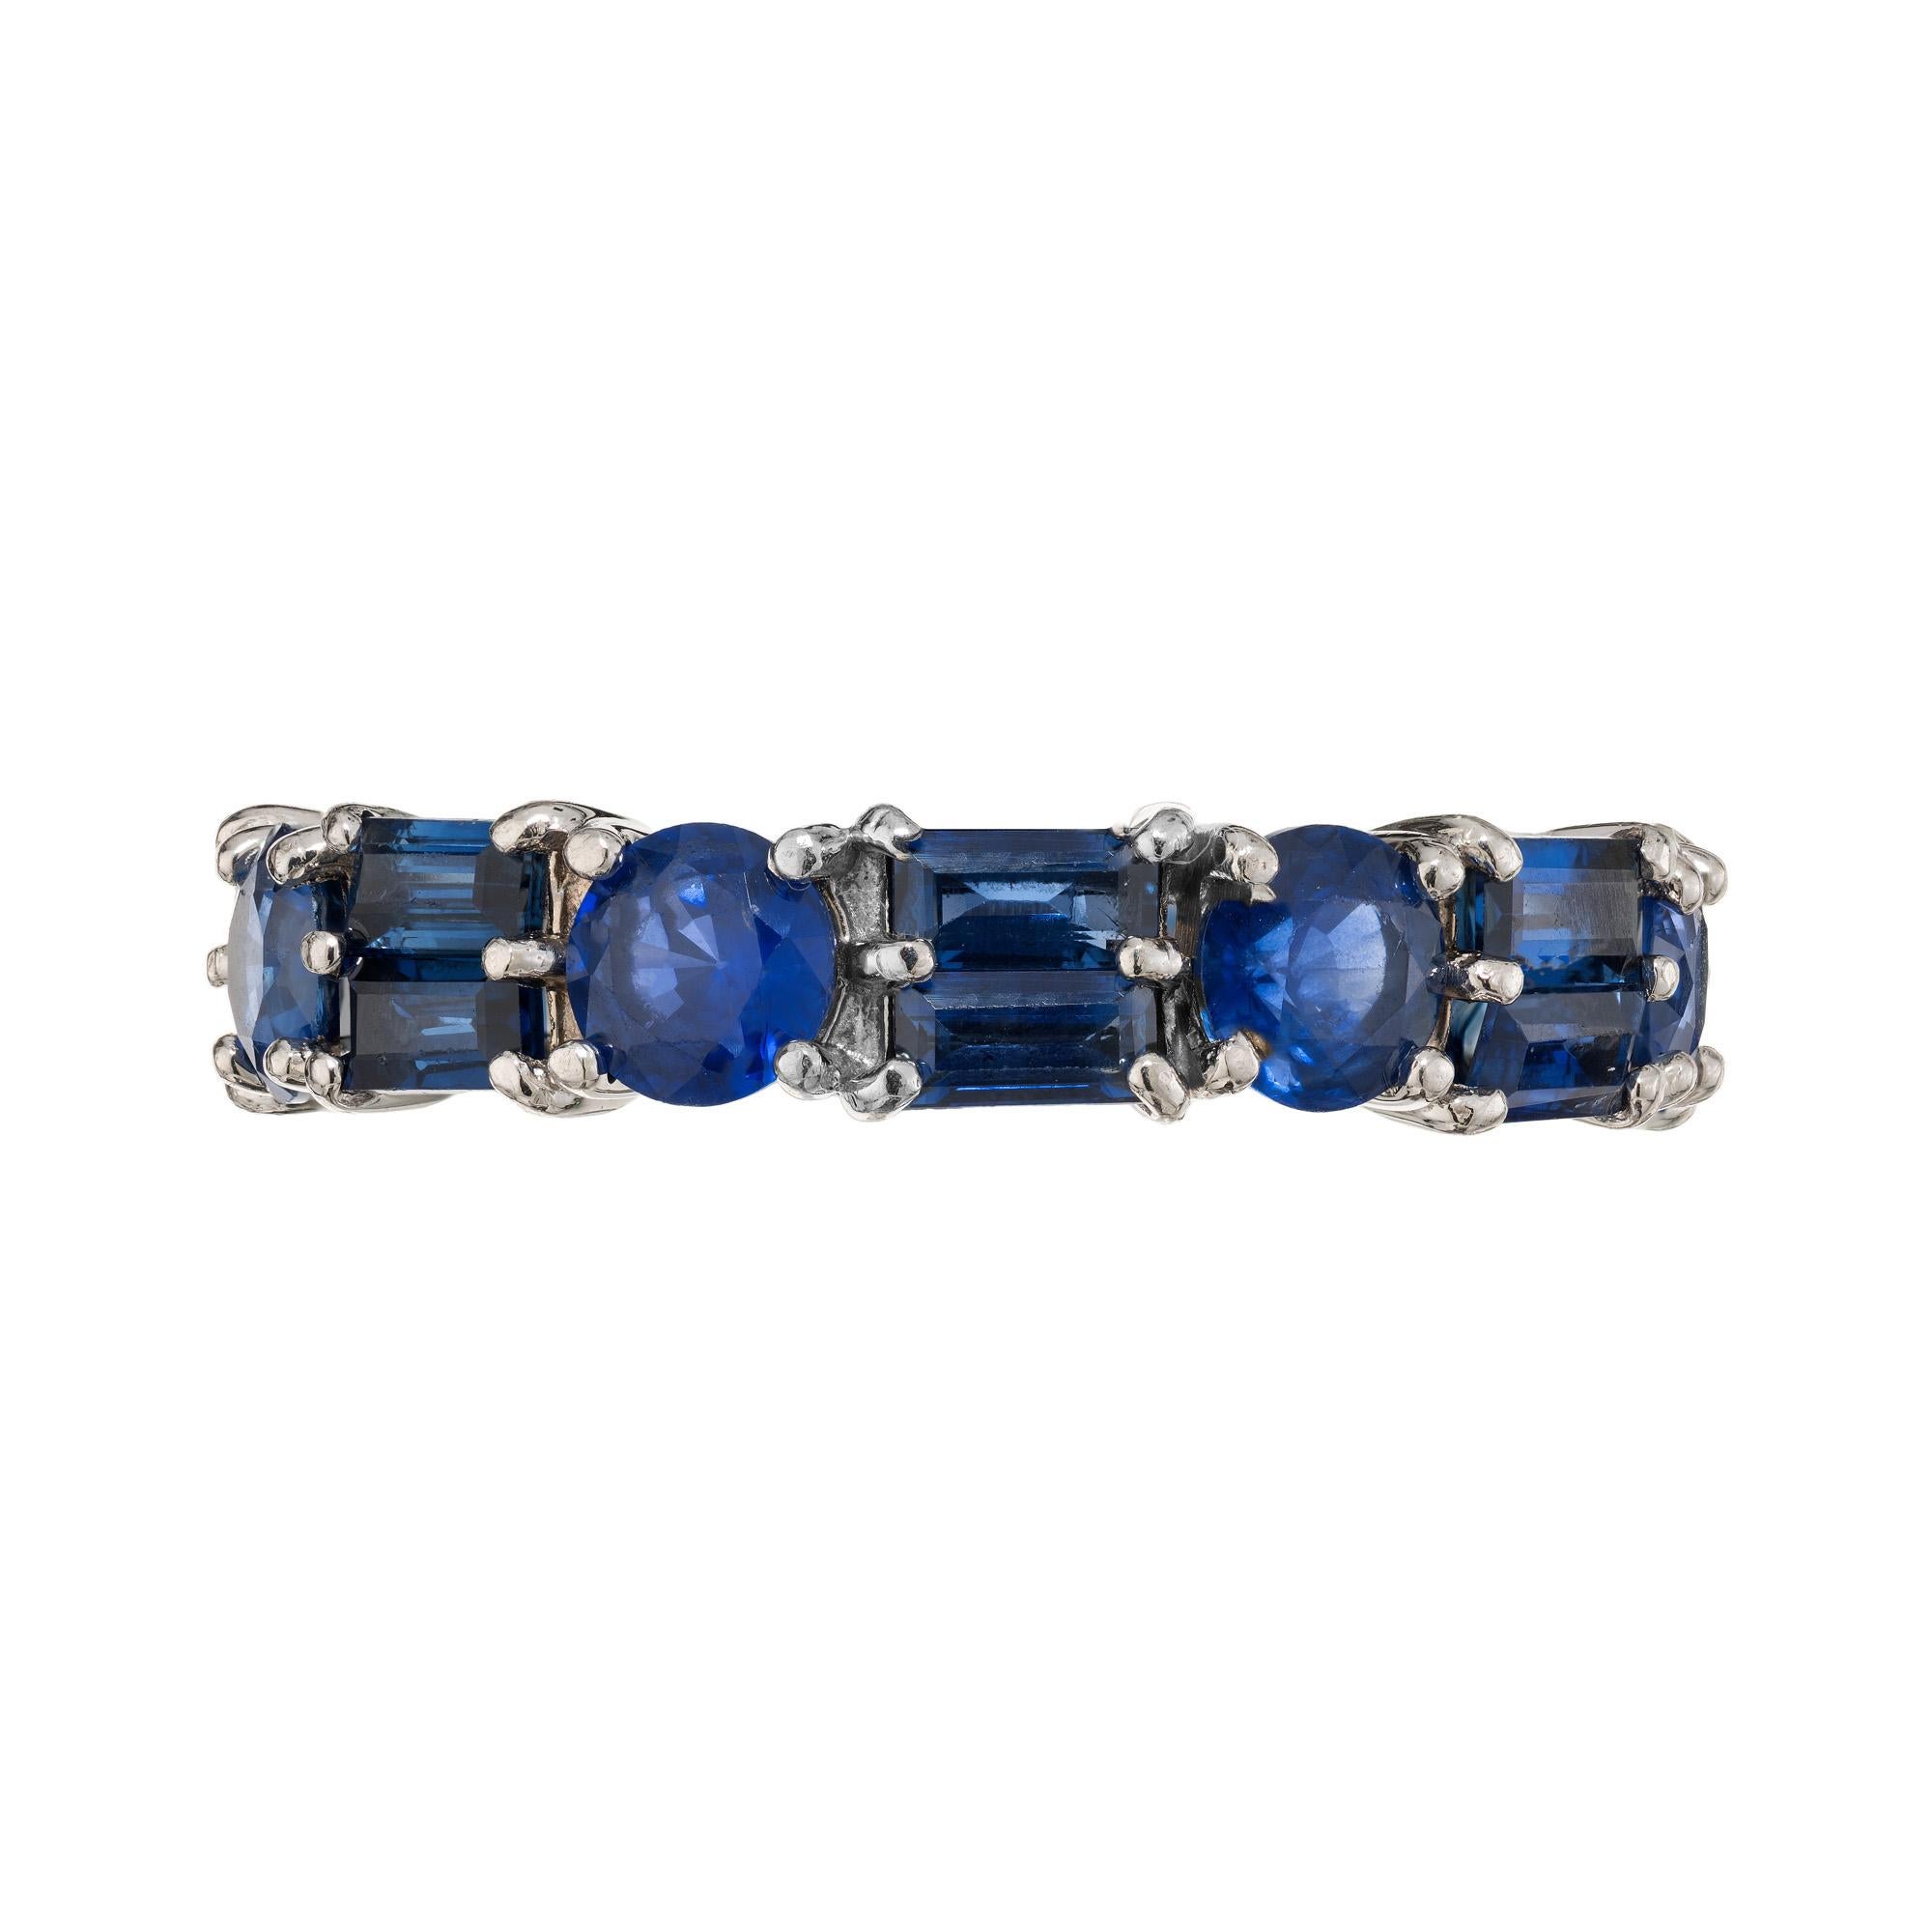 Round Baguette Sapphire Platinum Eternity Wedding Band Ring. 7 round blue sapphires totaling 2.10cts, alternating with 14 double row baguette sapphires also totaling 2.10cts. Set in platinum. This ring is a size 6.75 and not sizable. 

7 round blue